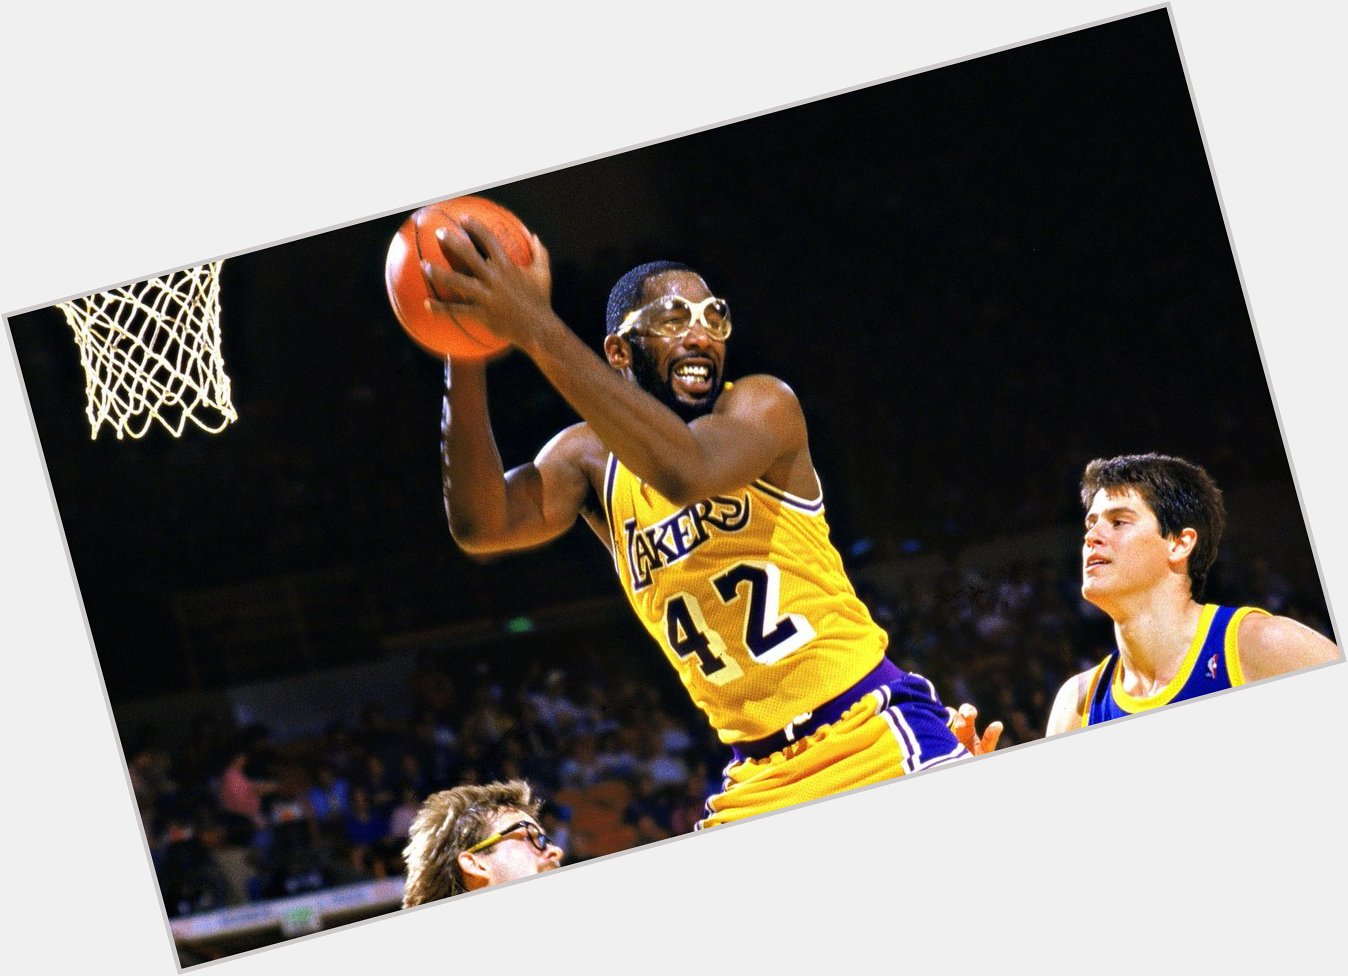 Happy Birthday to James Worthy, who turns 56 today! 